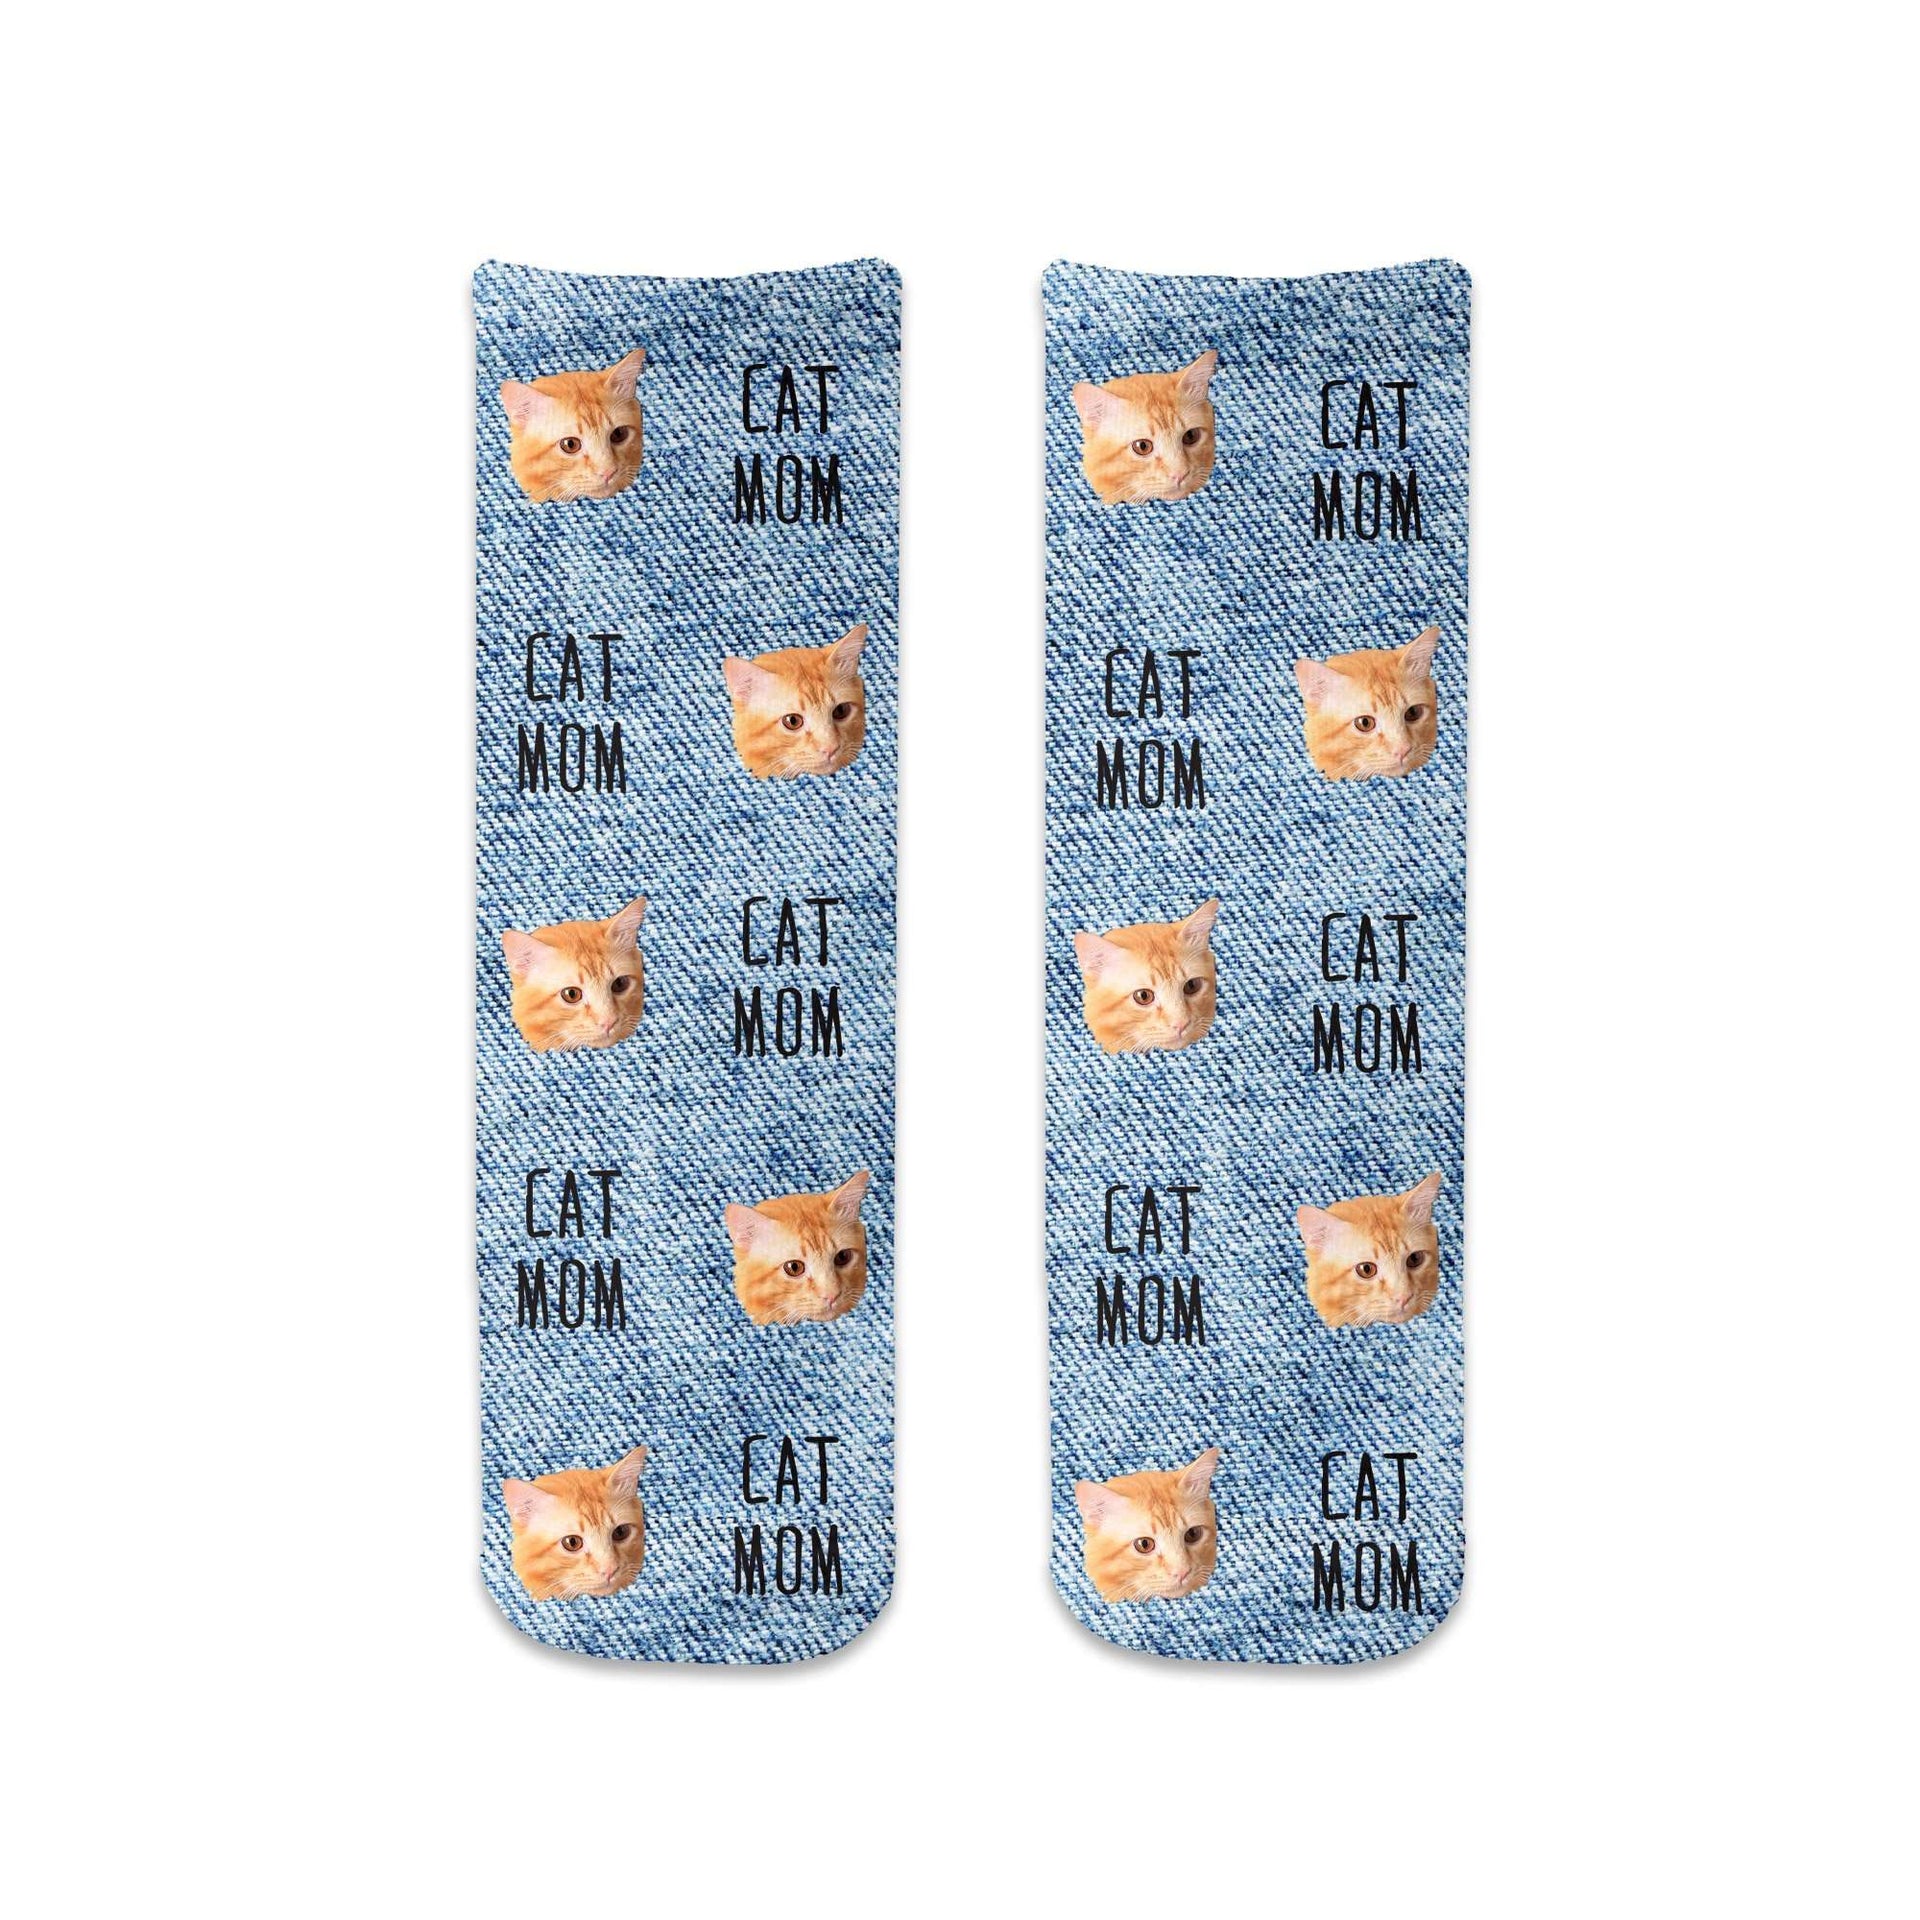 Cute denim background design custom printed on short cotton crew socks with cat mom text and personalized using your own photo face cropped into the design and printed all over makes a great gift.